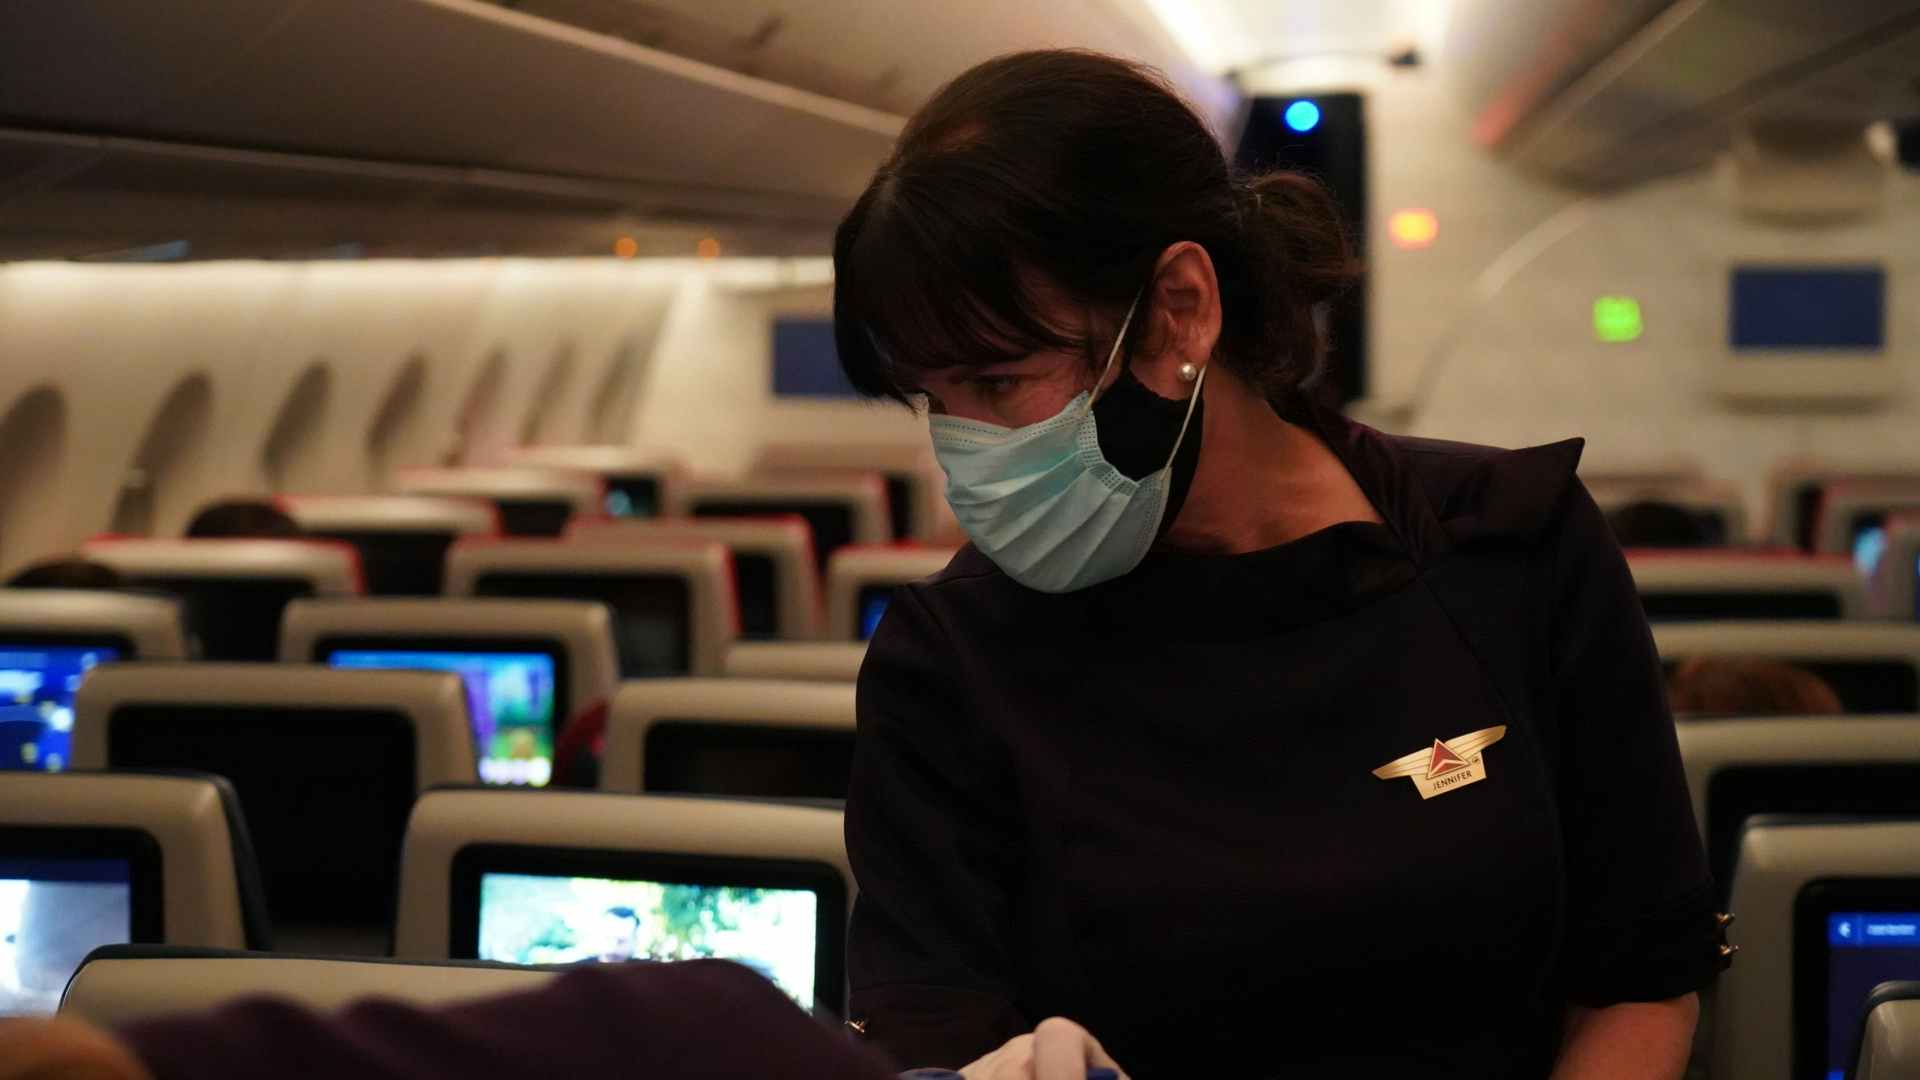 woman standing in plane aisle